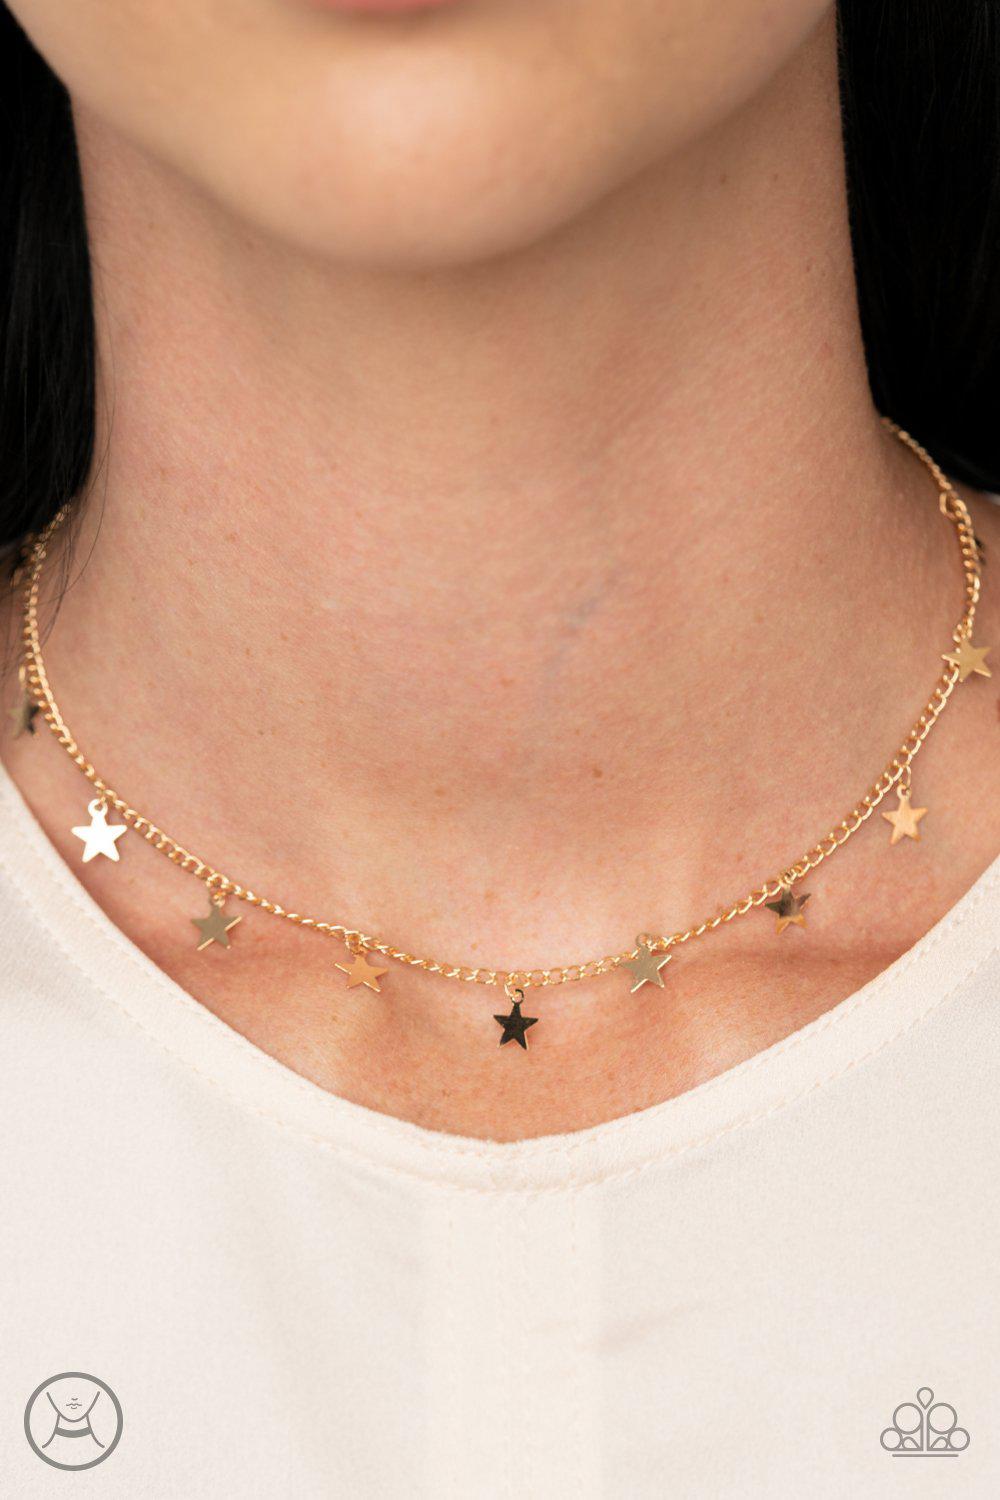 Starry Skies Gold Star Choker Necklace - Paparazzi Accessories - model -CarasShop.com - $5 Jewelry by Cara Jewels